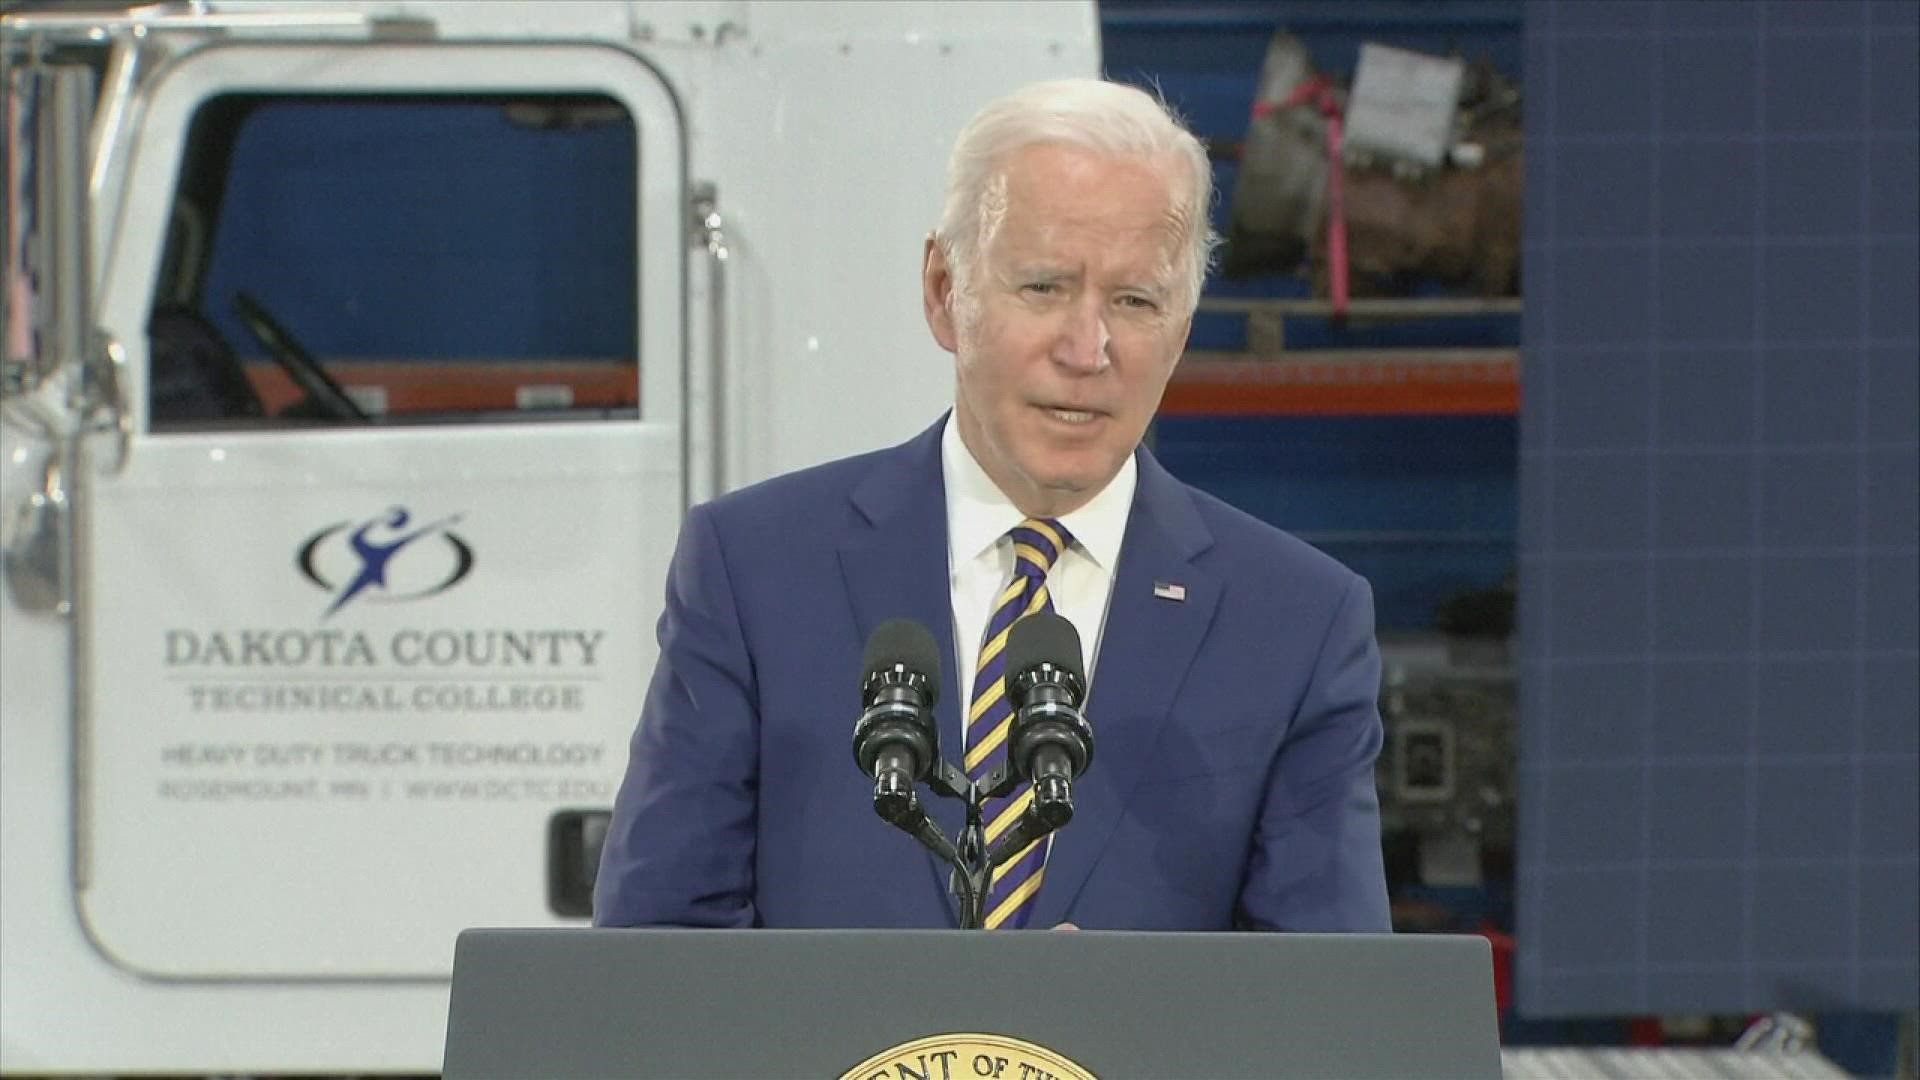 "My heart goes out to the families enduring the unimaginable grief of losing a loved one," Biden said prior to an infrastructure speech in Minnesota.